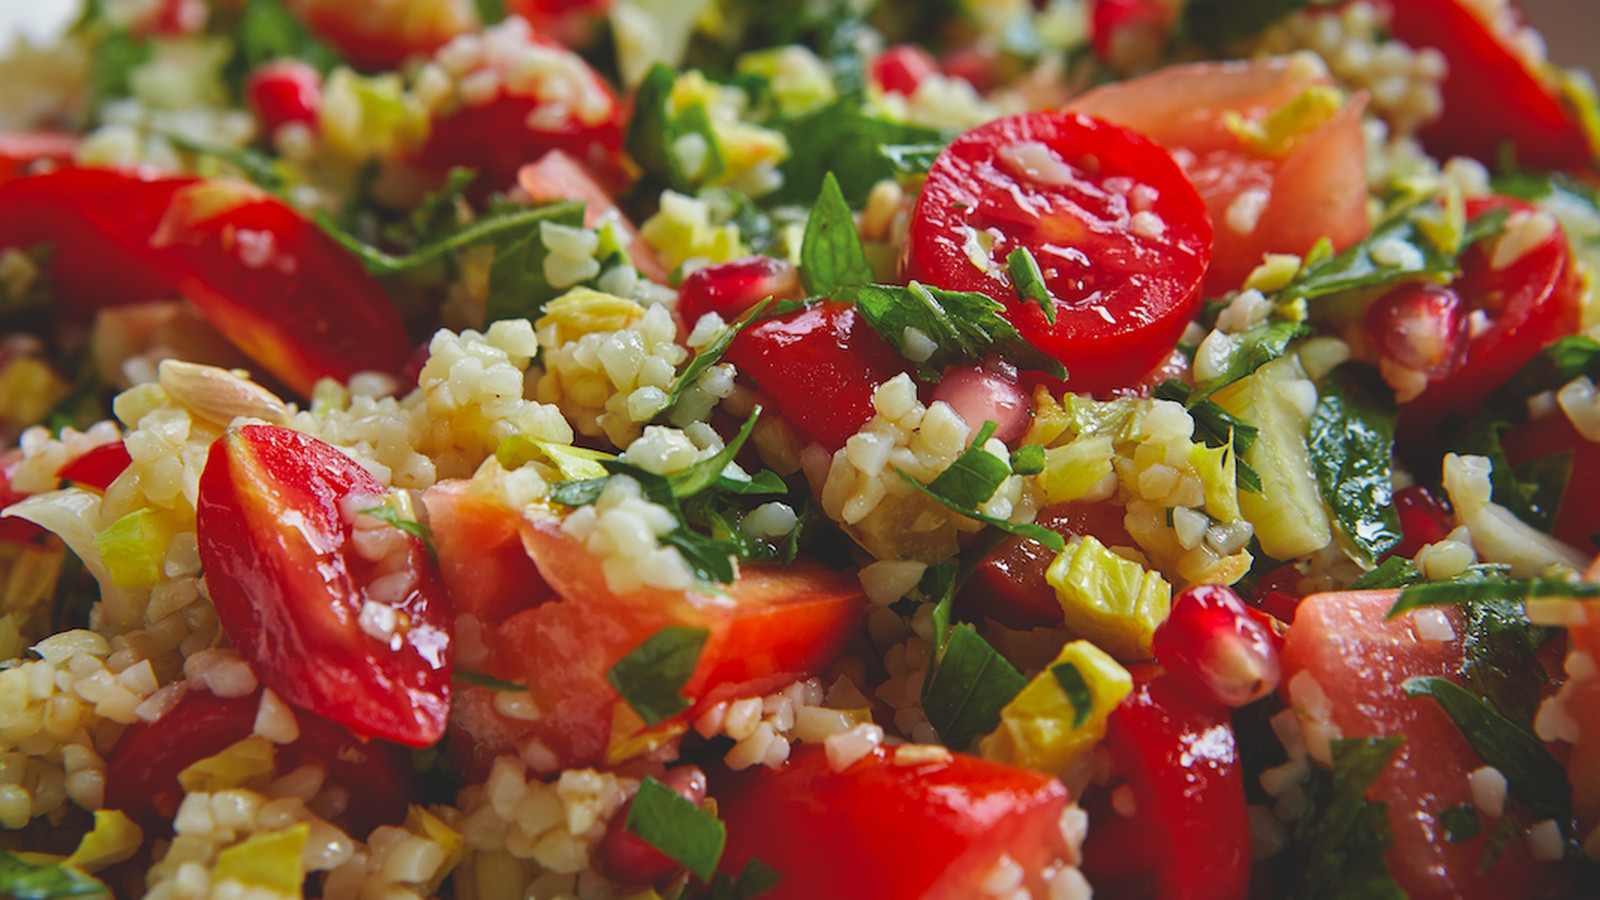 Middle Eastern Salad Recipes
 These Middle Eastern Salad Recipes Make Tomatoes the Star